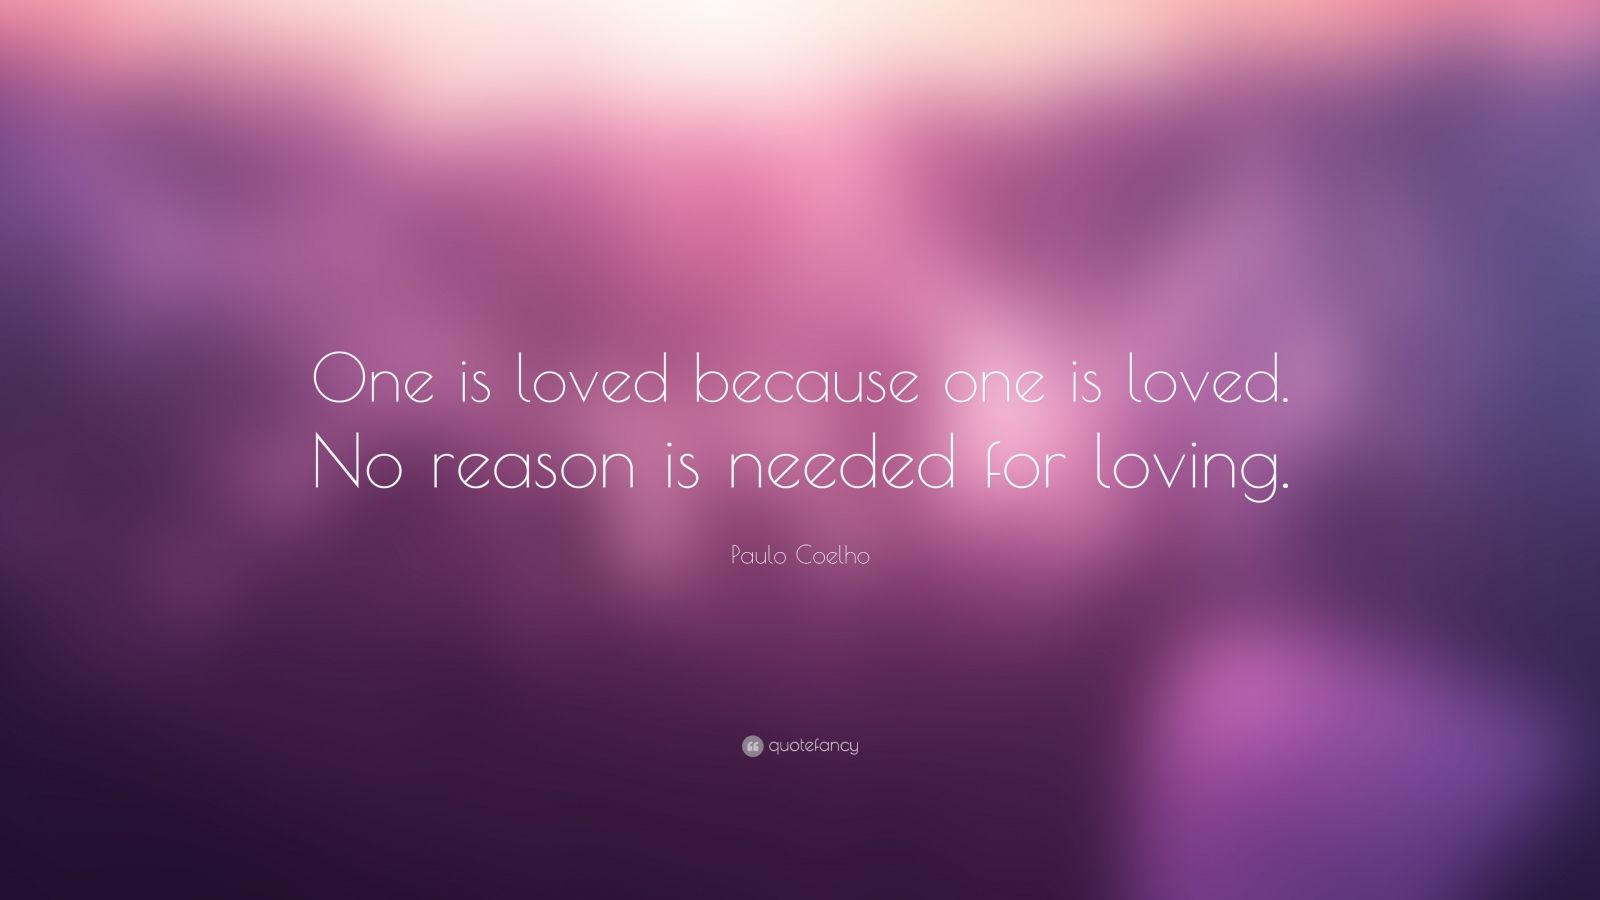 Paulo Coelho Quote: “One is loved because one is loved. No reason is ...